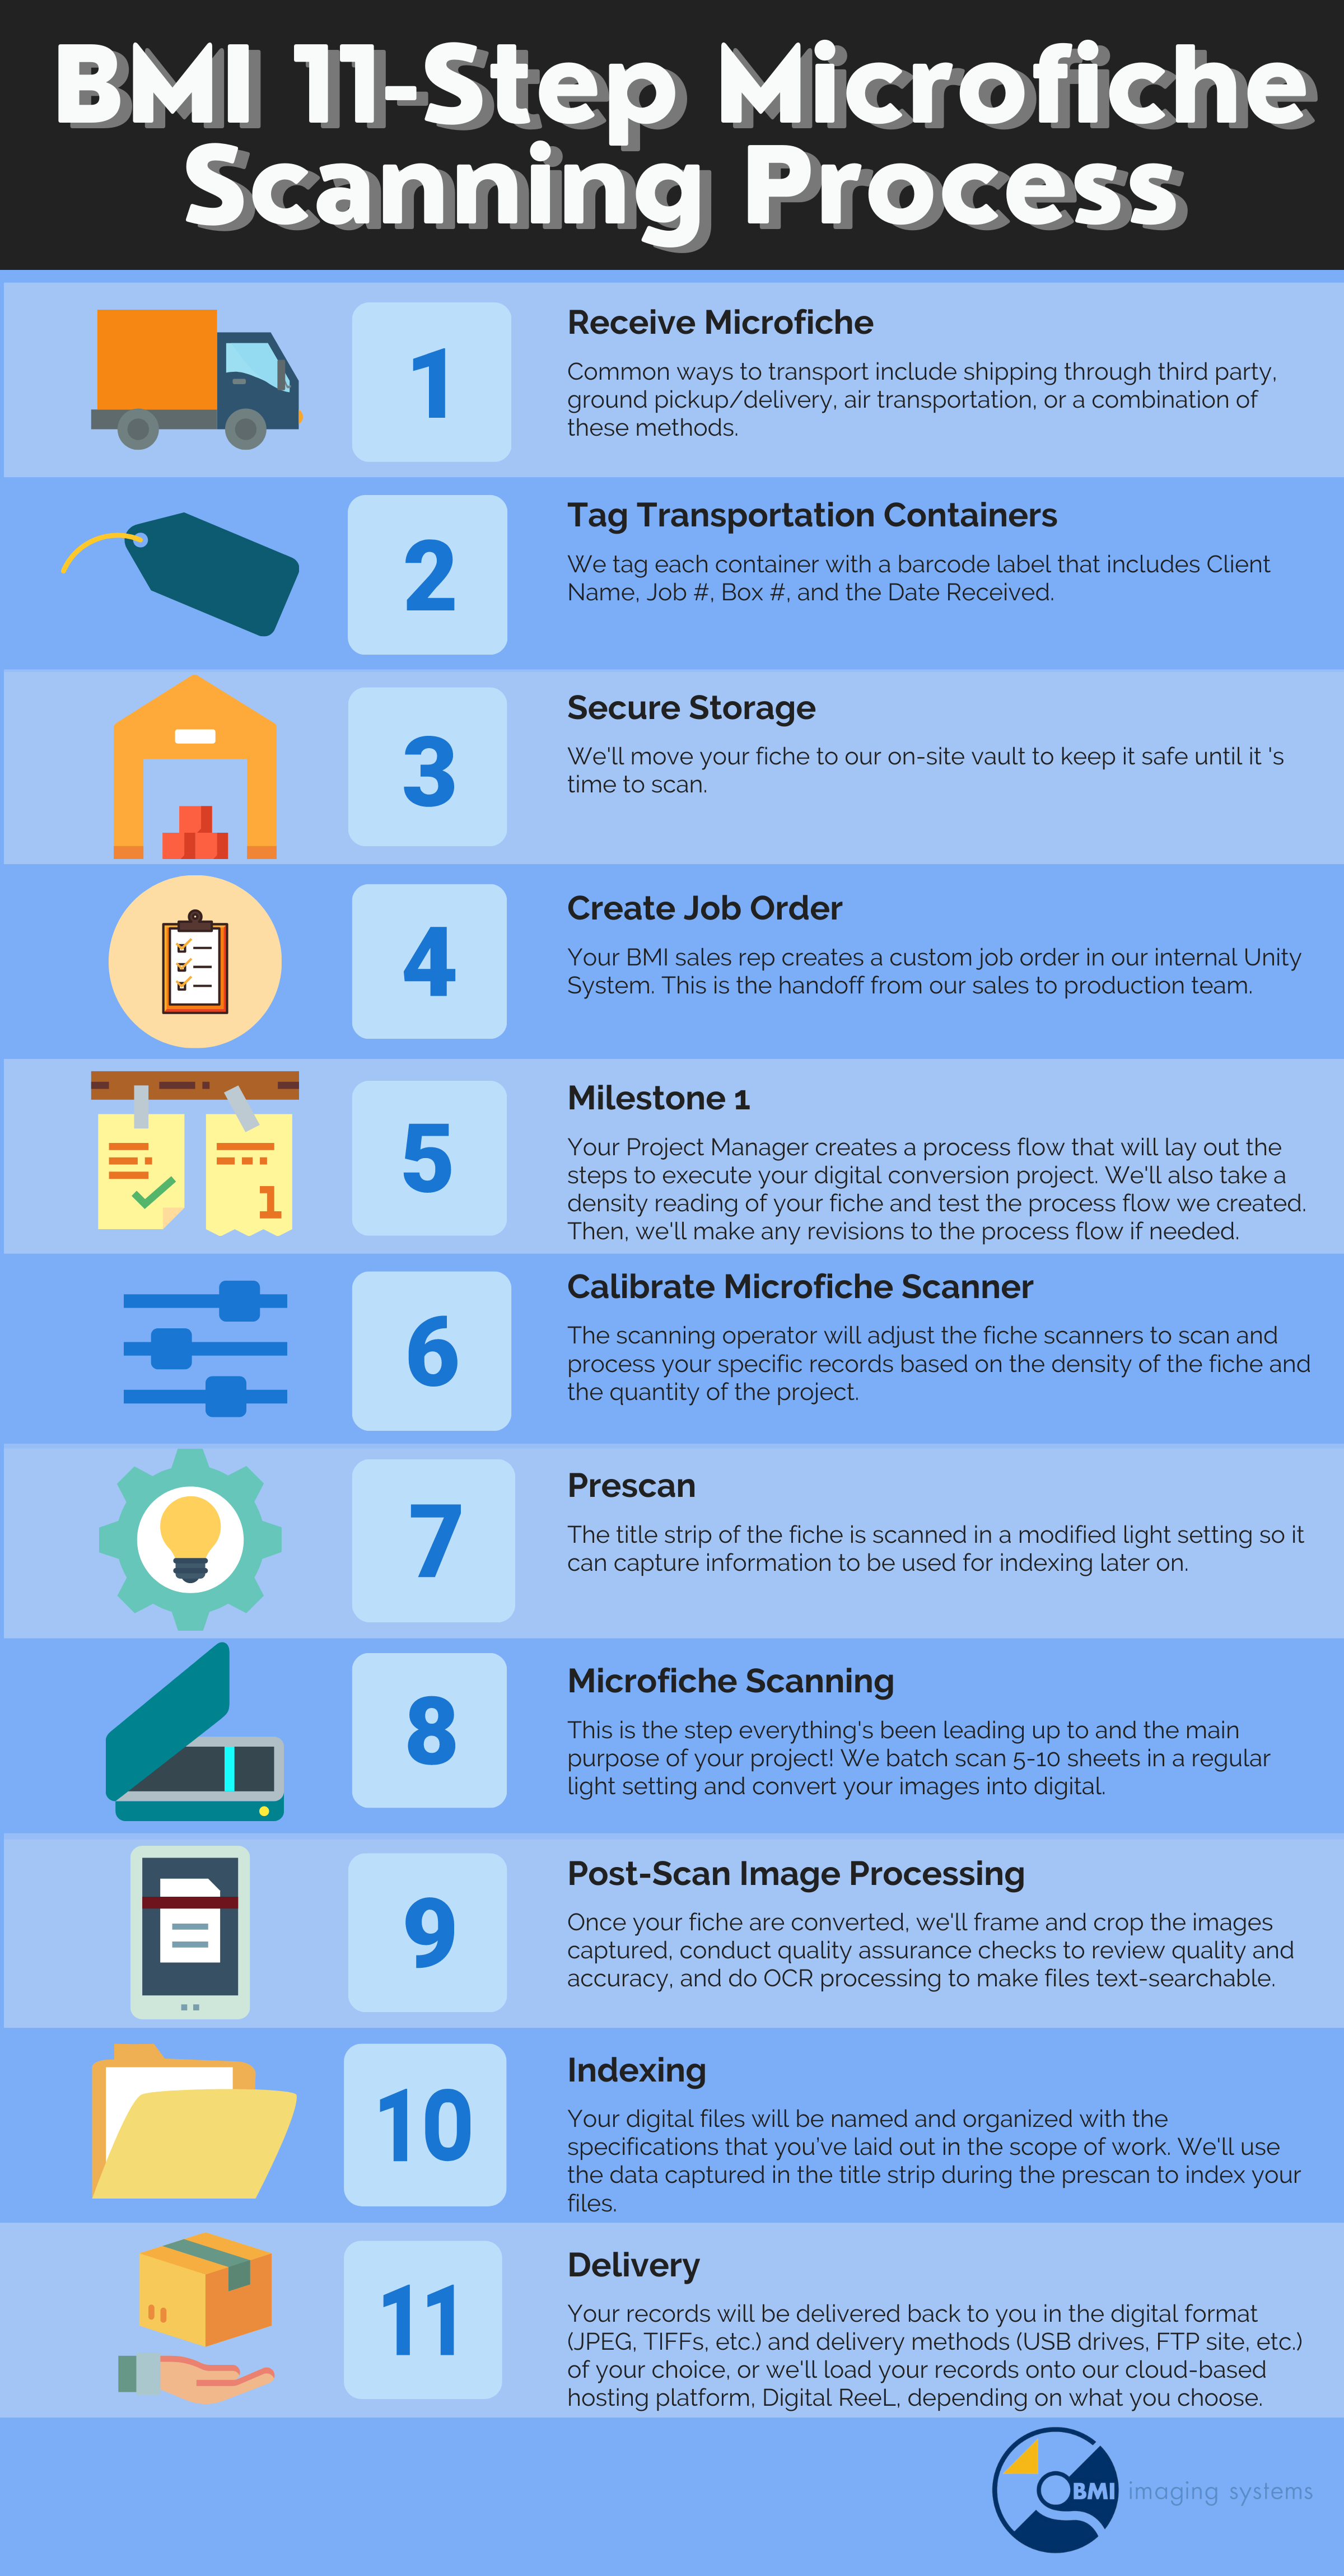 BMI 11-Step Microfiche Scanning Process Infographic